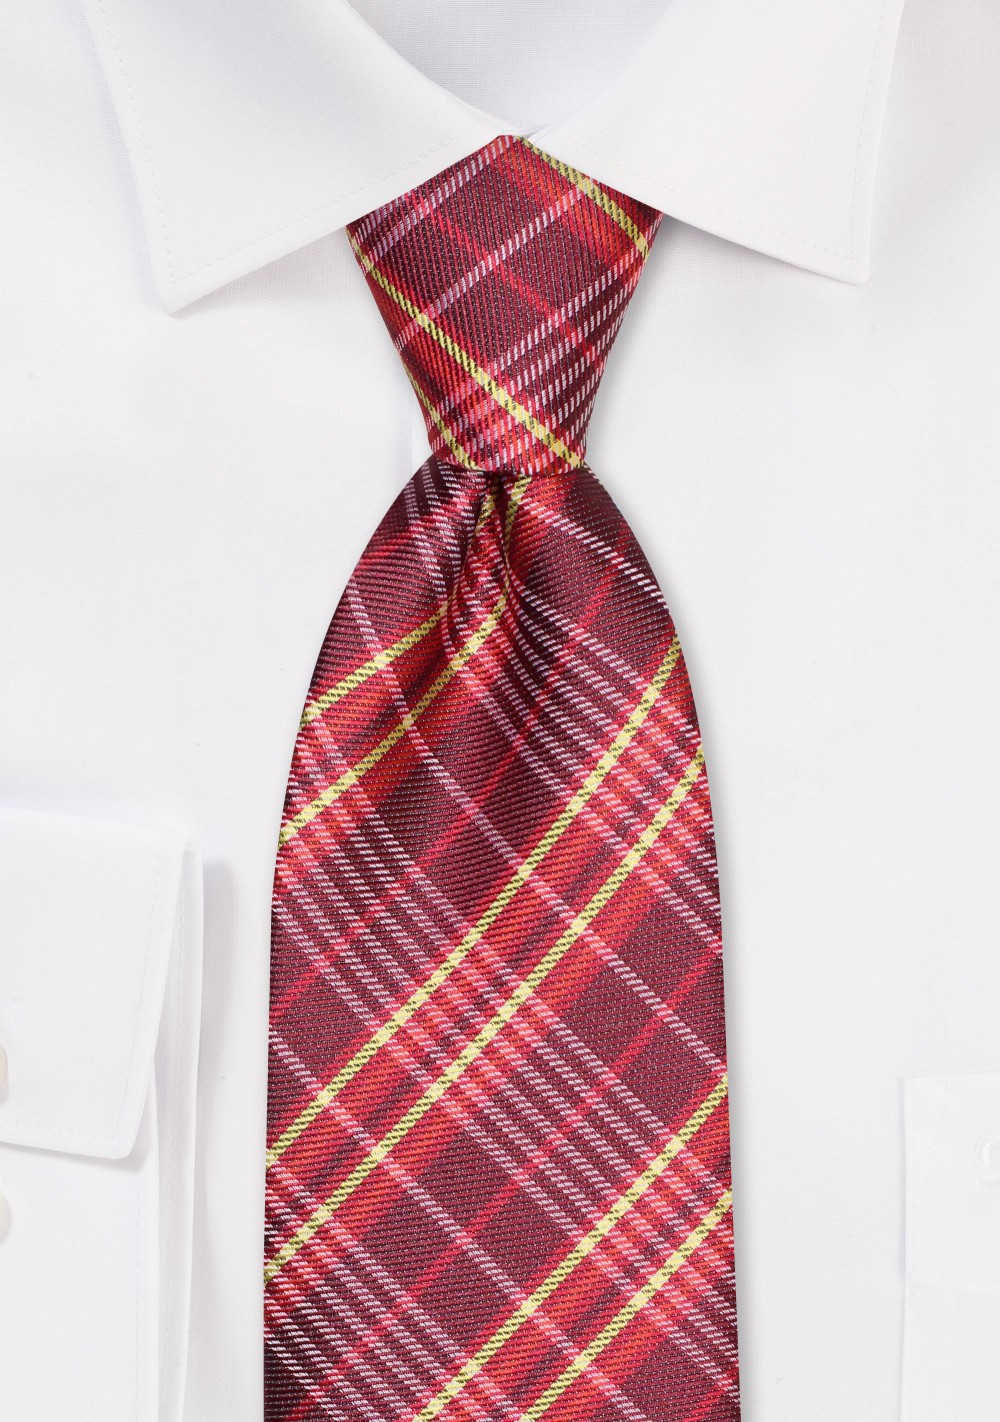 Plaid XL Tie in Red and Golden Yellow